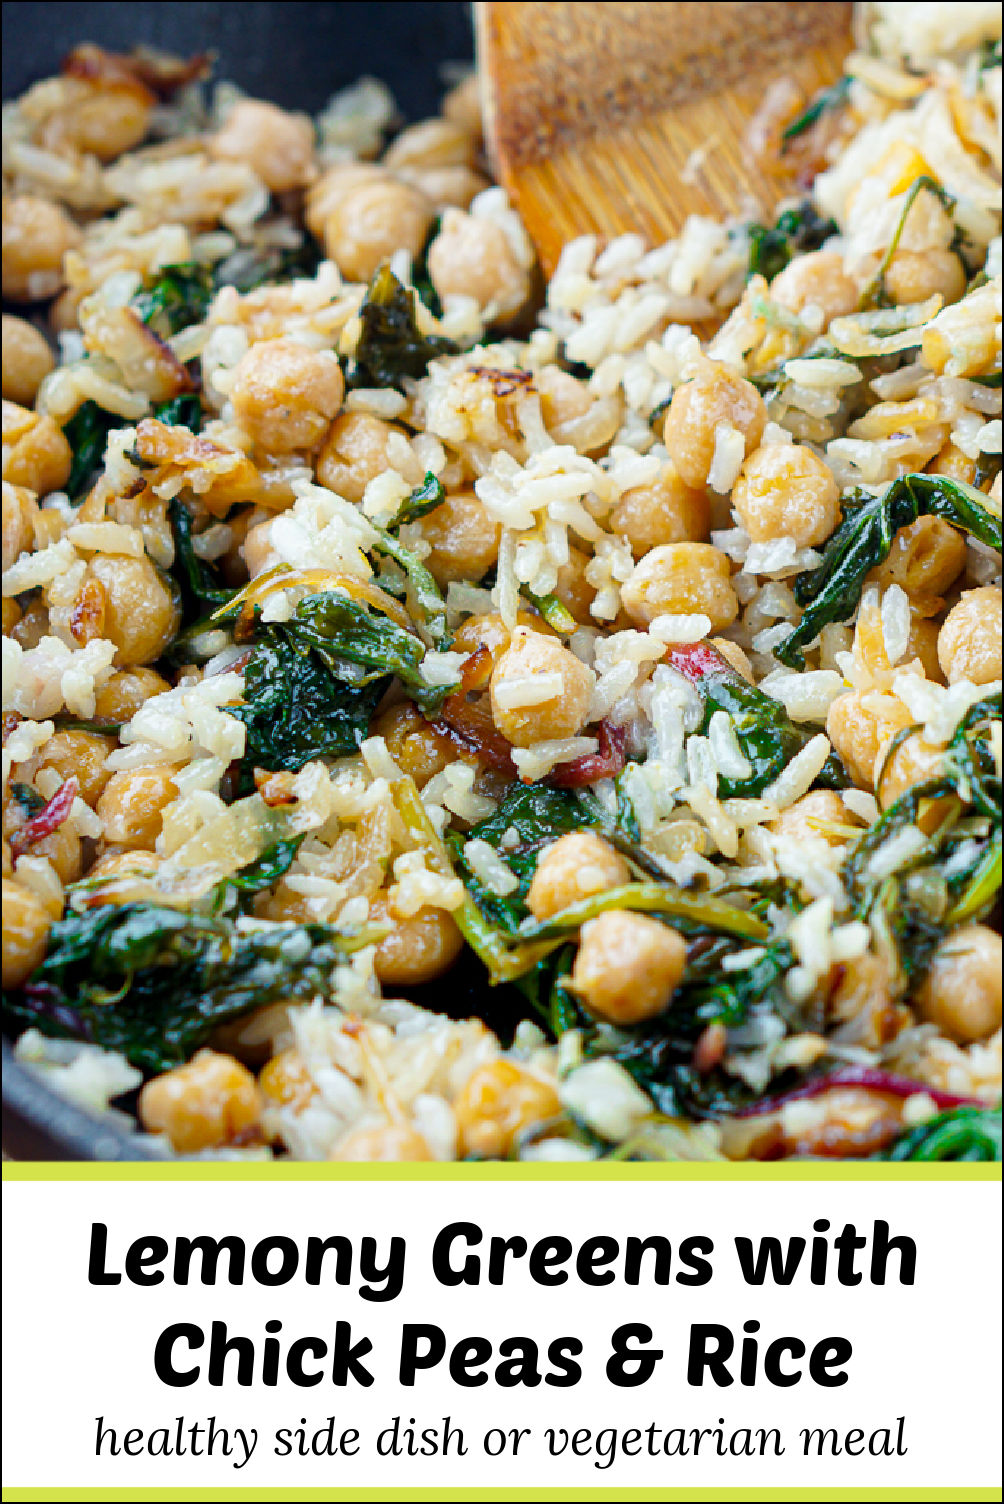 pan with lemony greens, chickpeas and rice and text